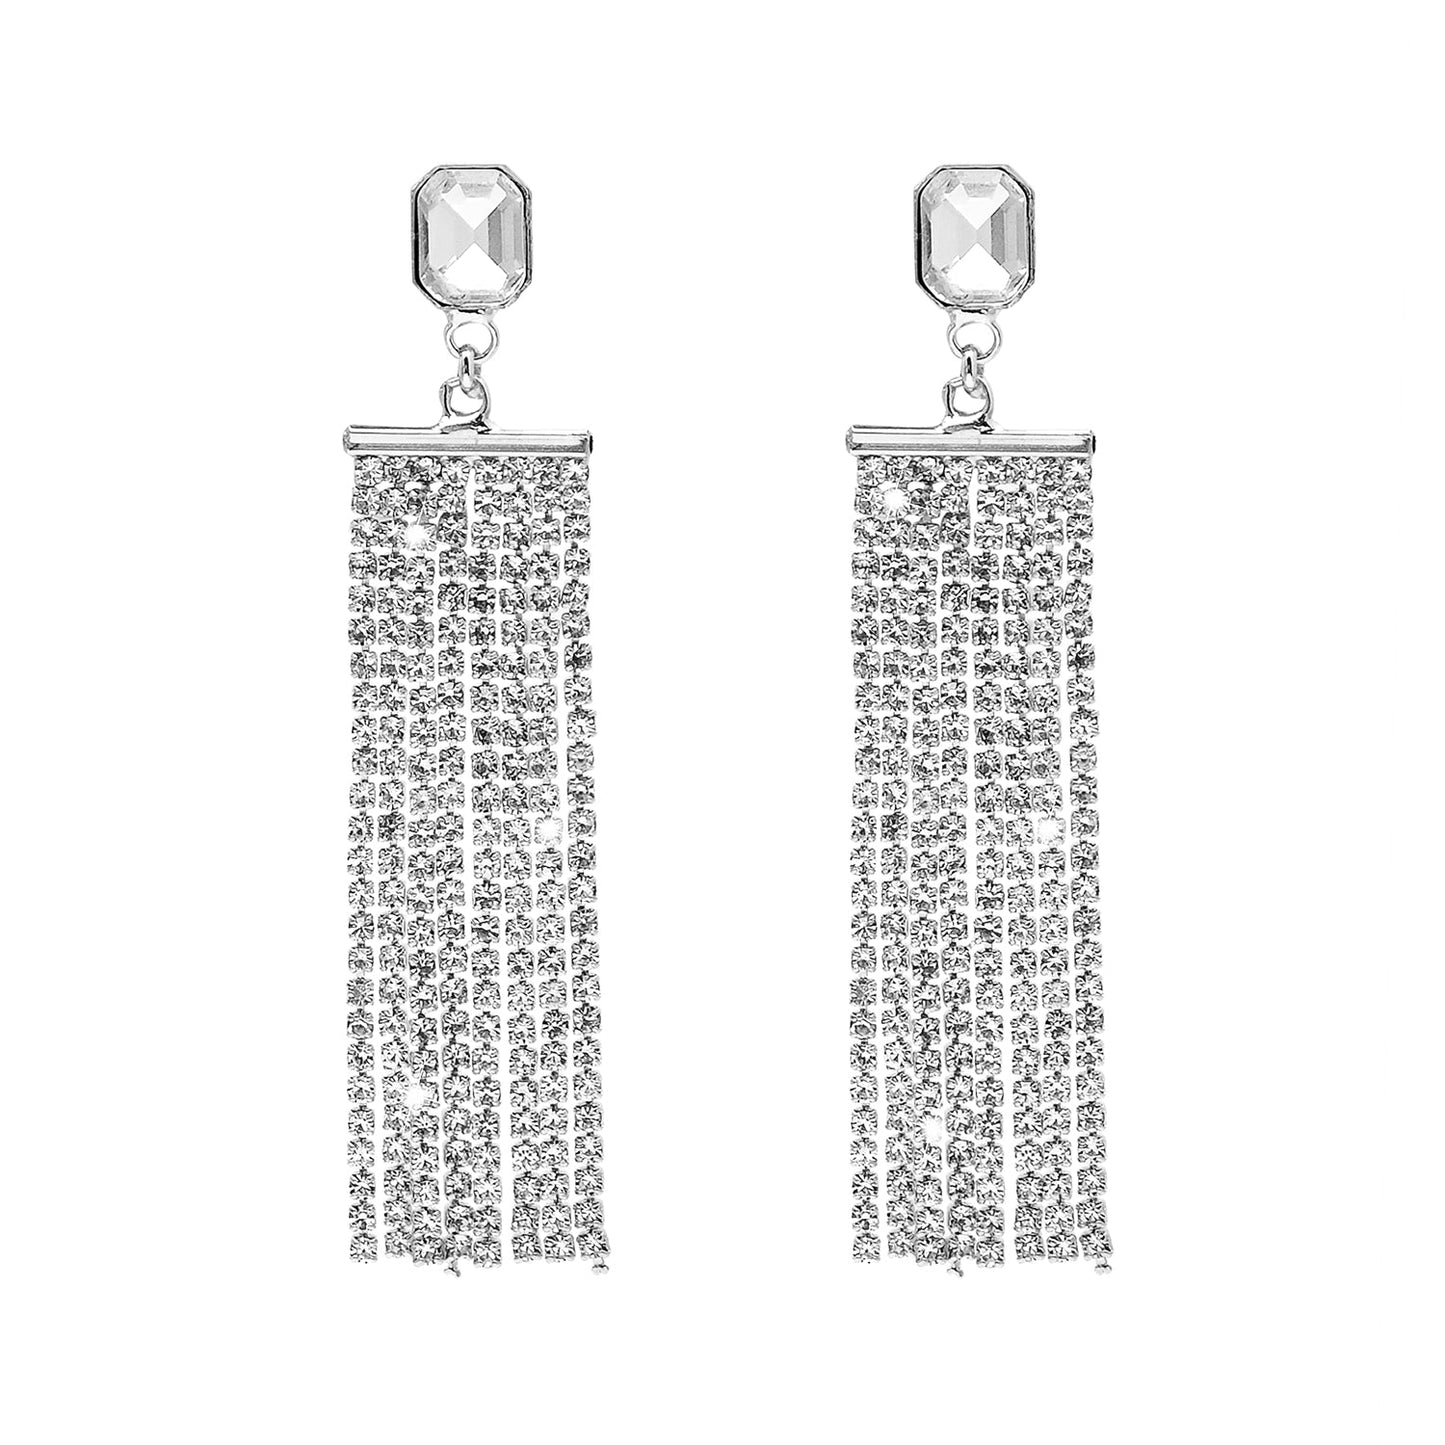 Shining Jewel Crystal and AD Silver Plated Fancy Western Style Cocktail Chandelier Long Shoulder Duster earrings for women (SJ_1959_S)